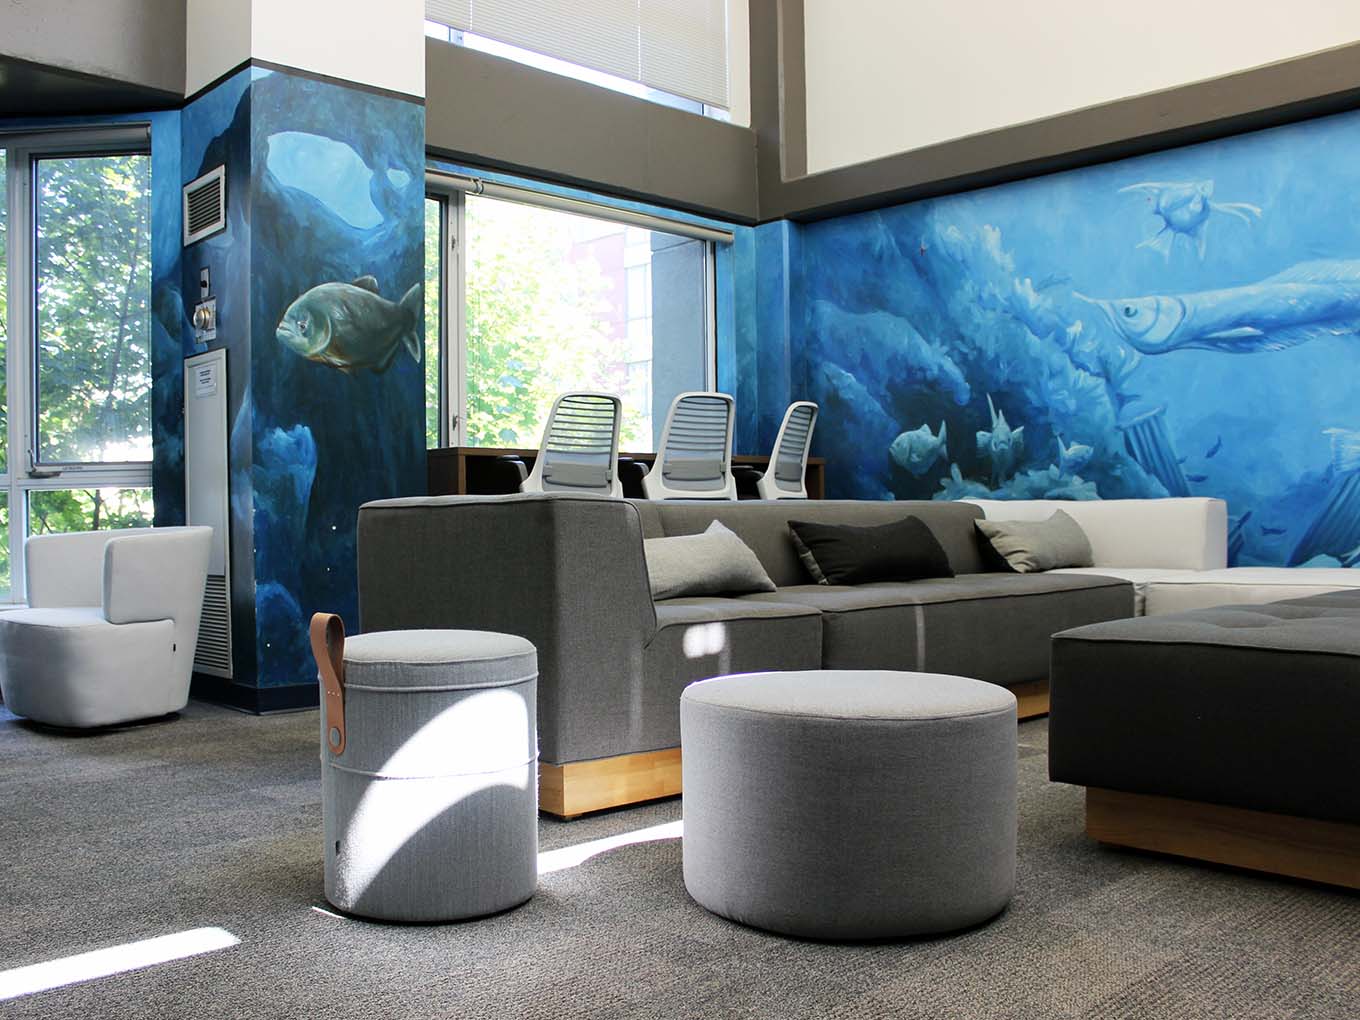 Suites and Amenities - Fish bowl